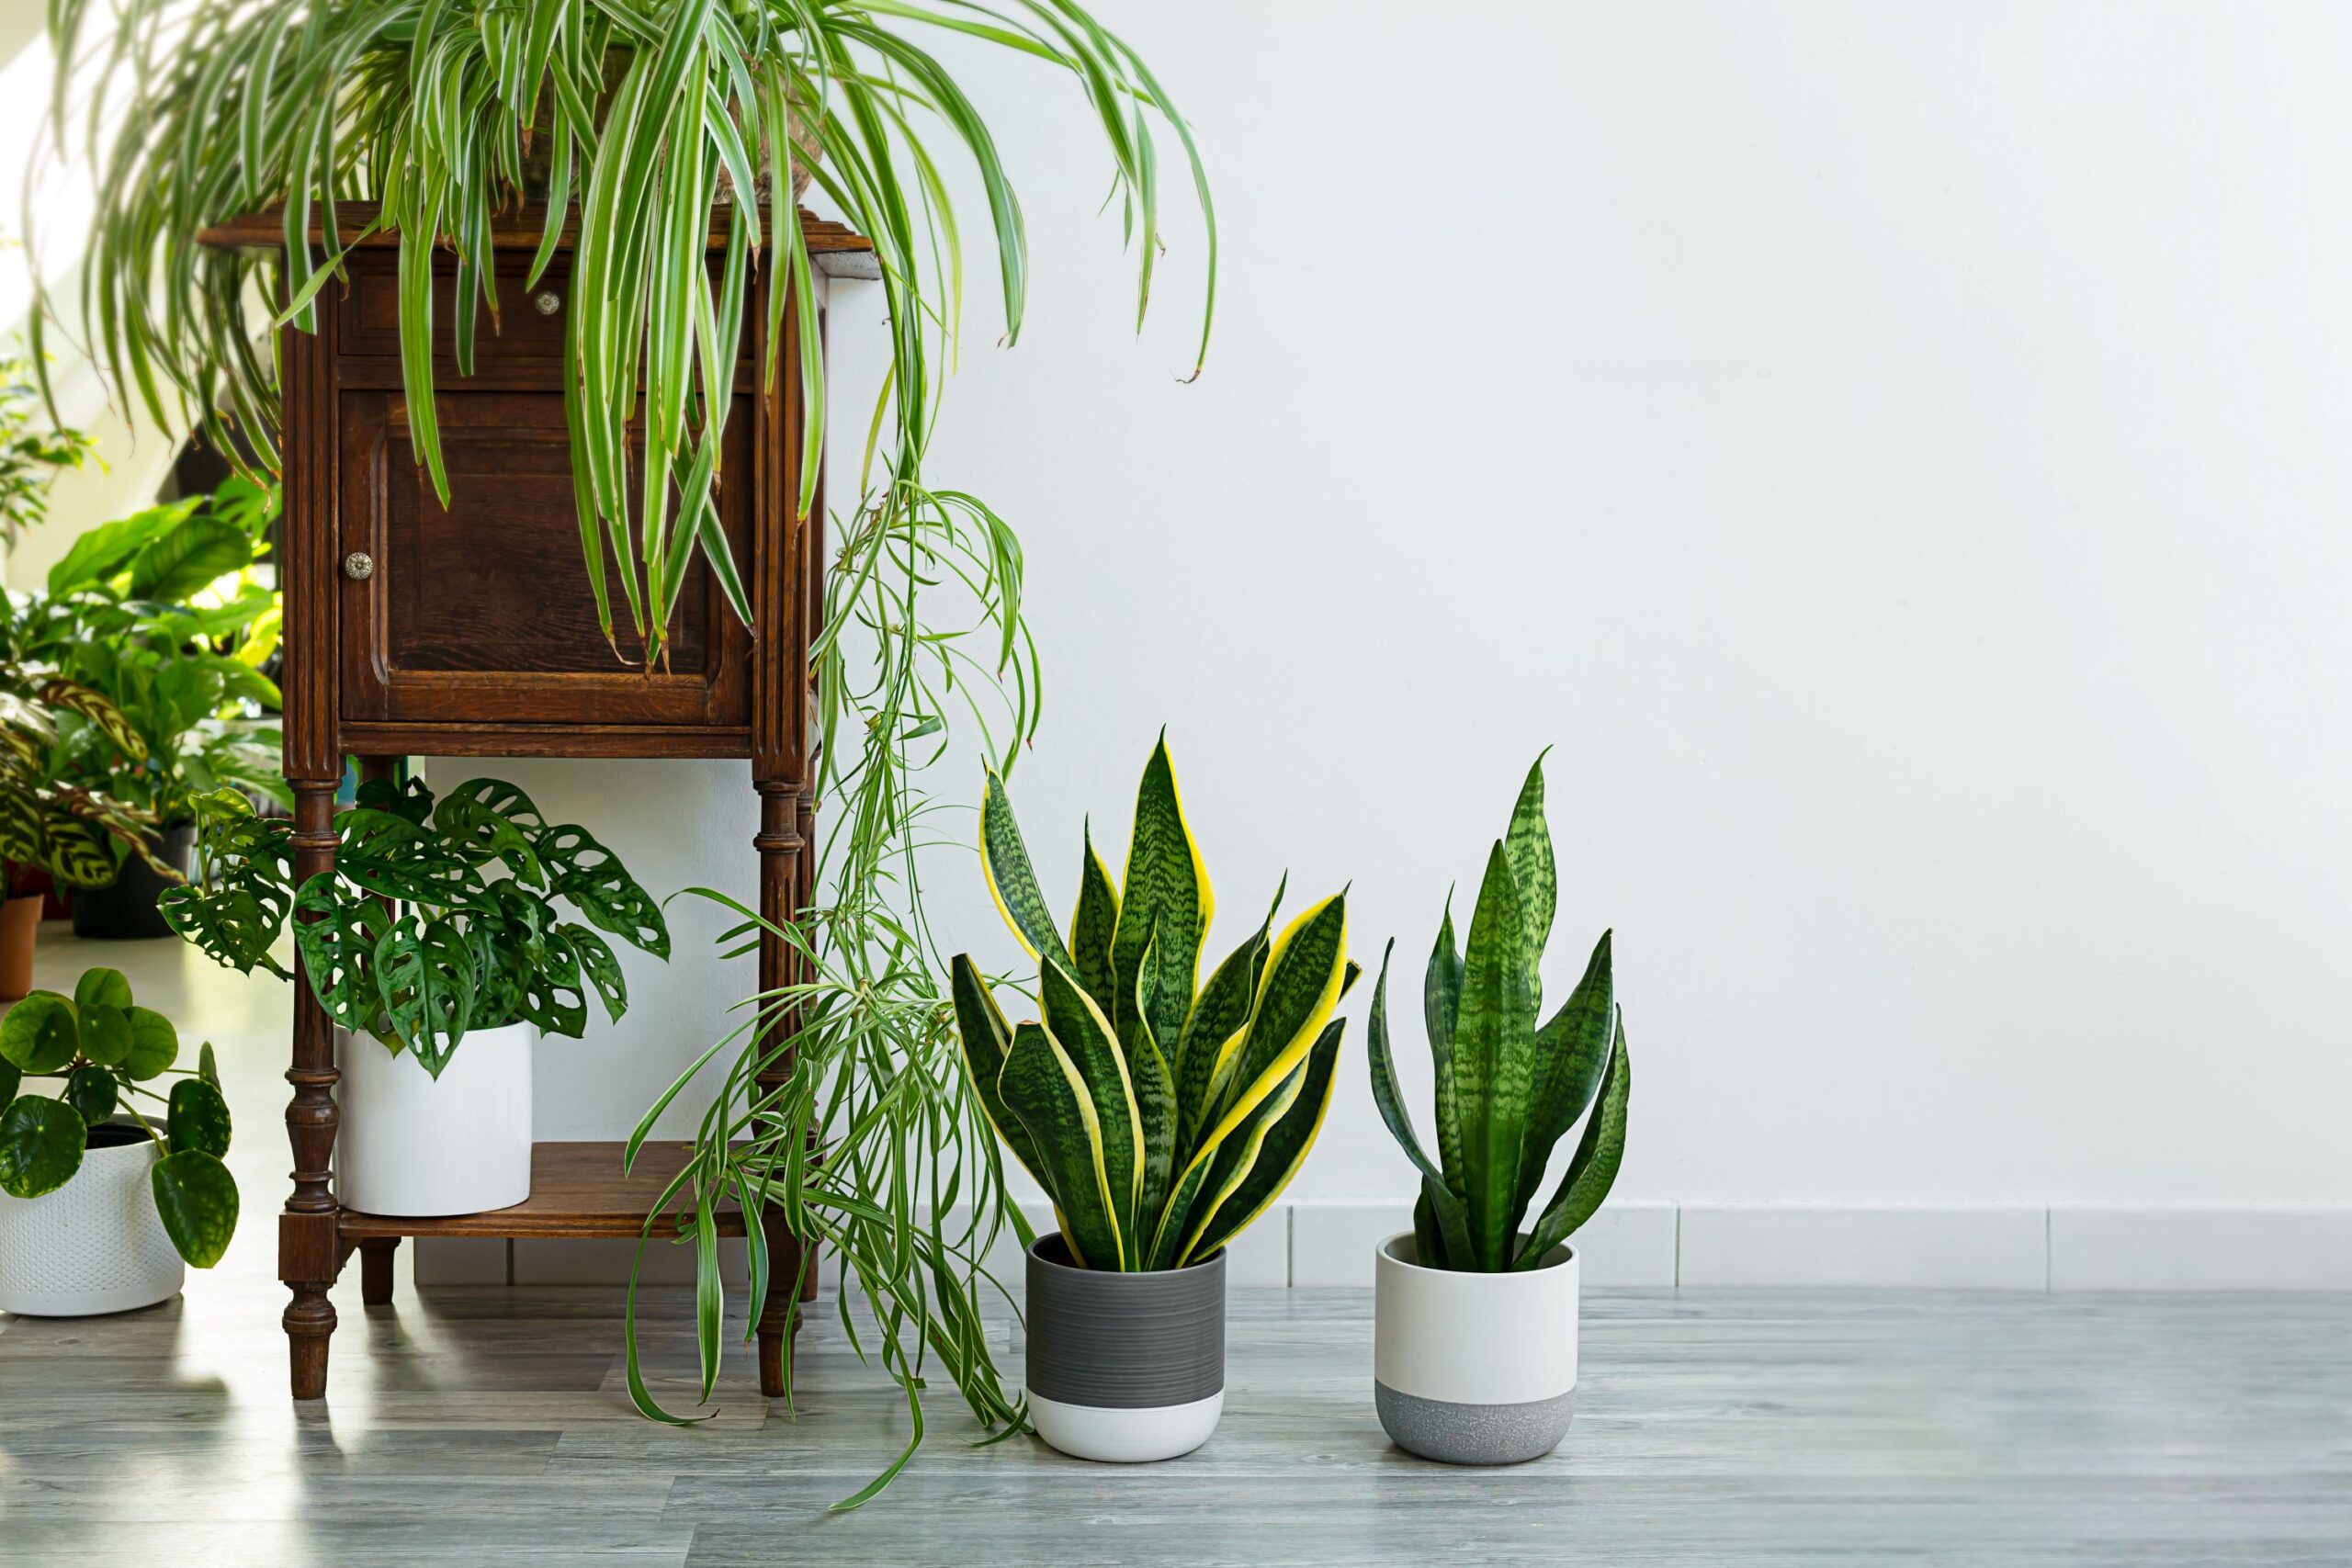 Functional Beauty: Adding A Splash Of Greenery To Your Indoor Spaces